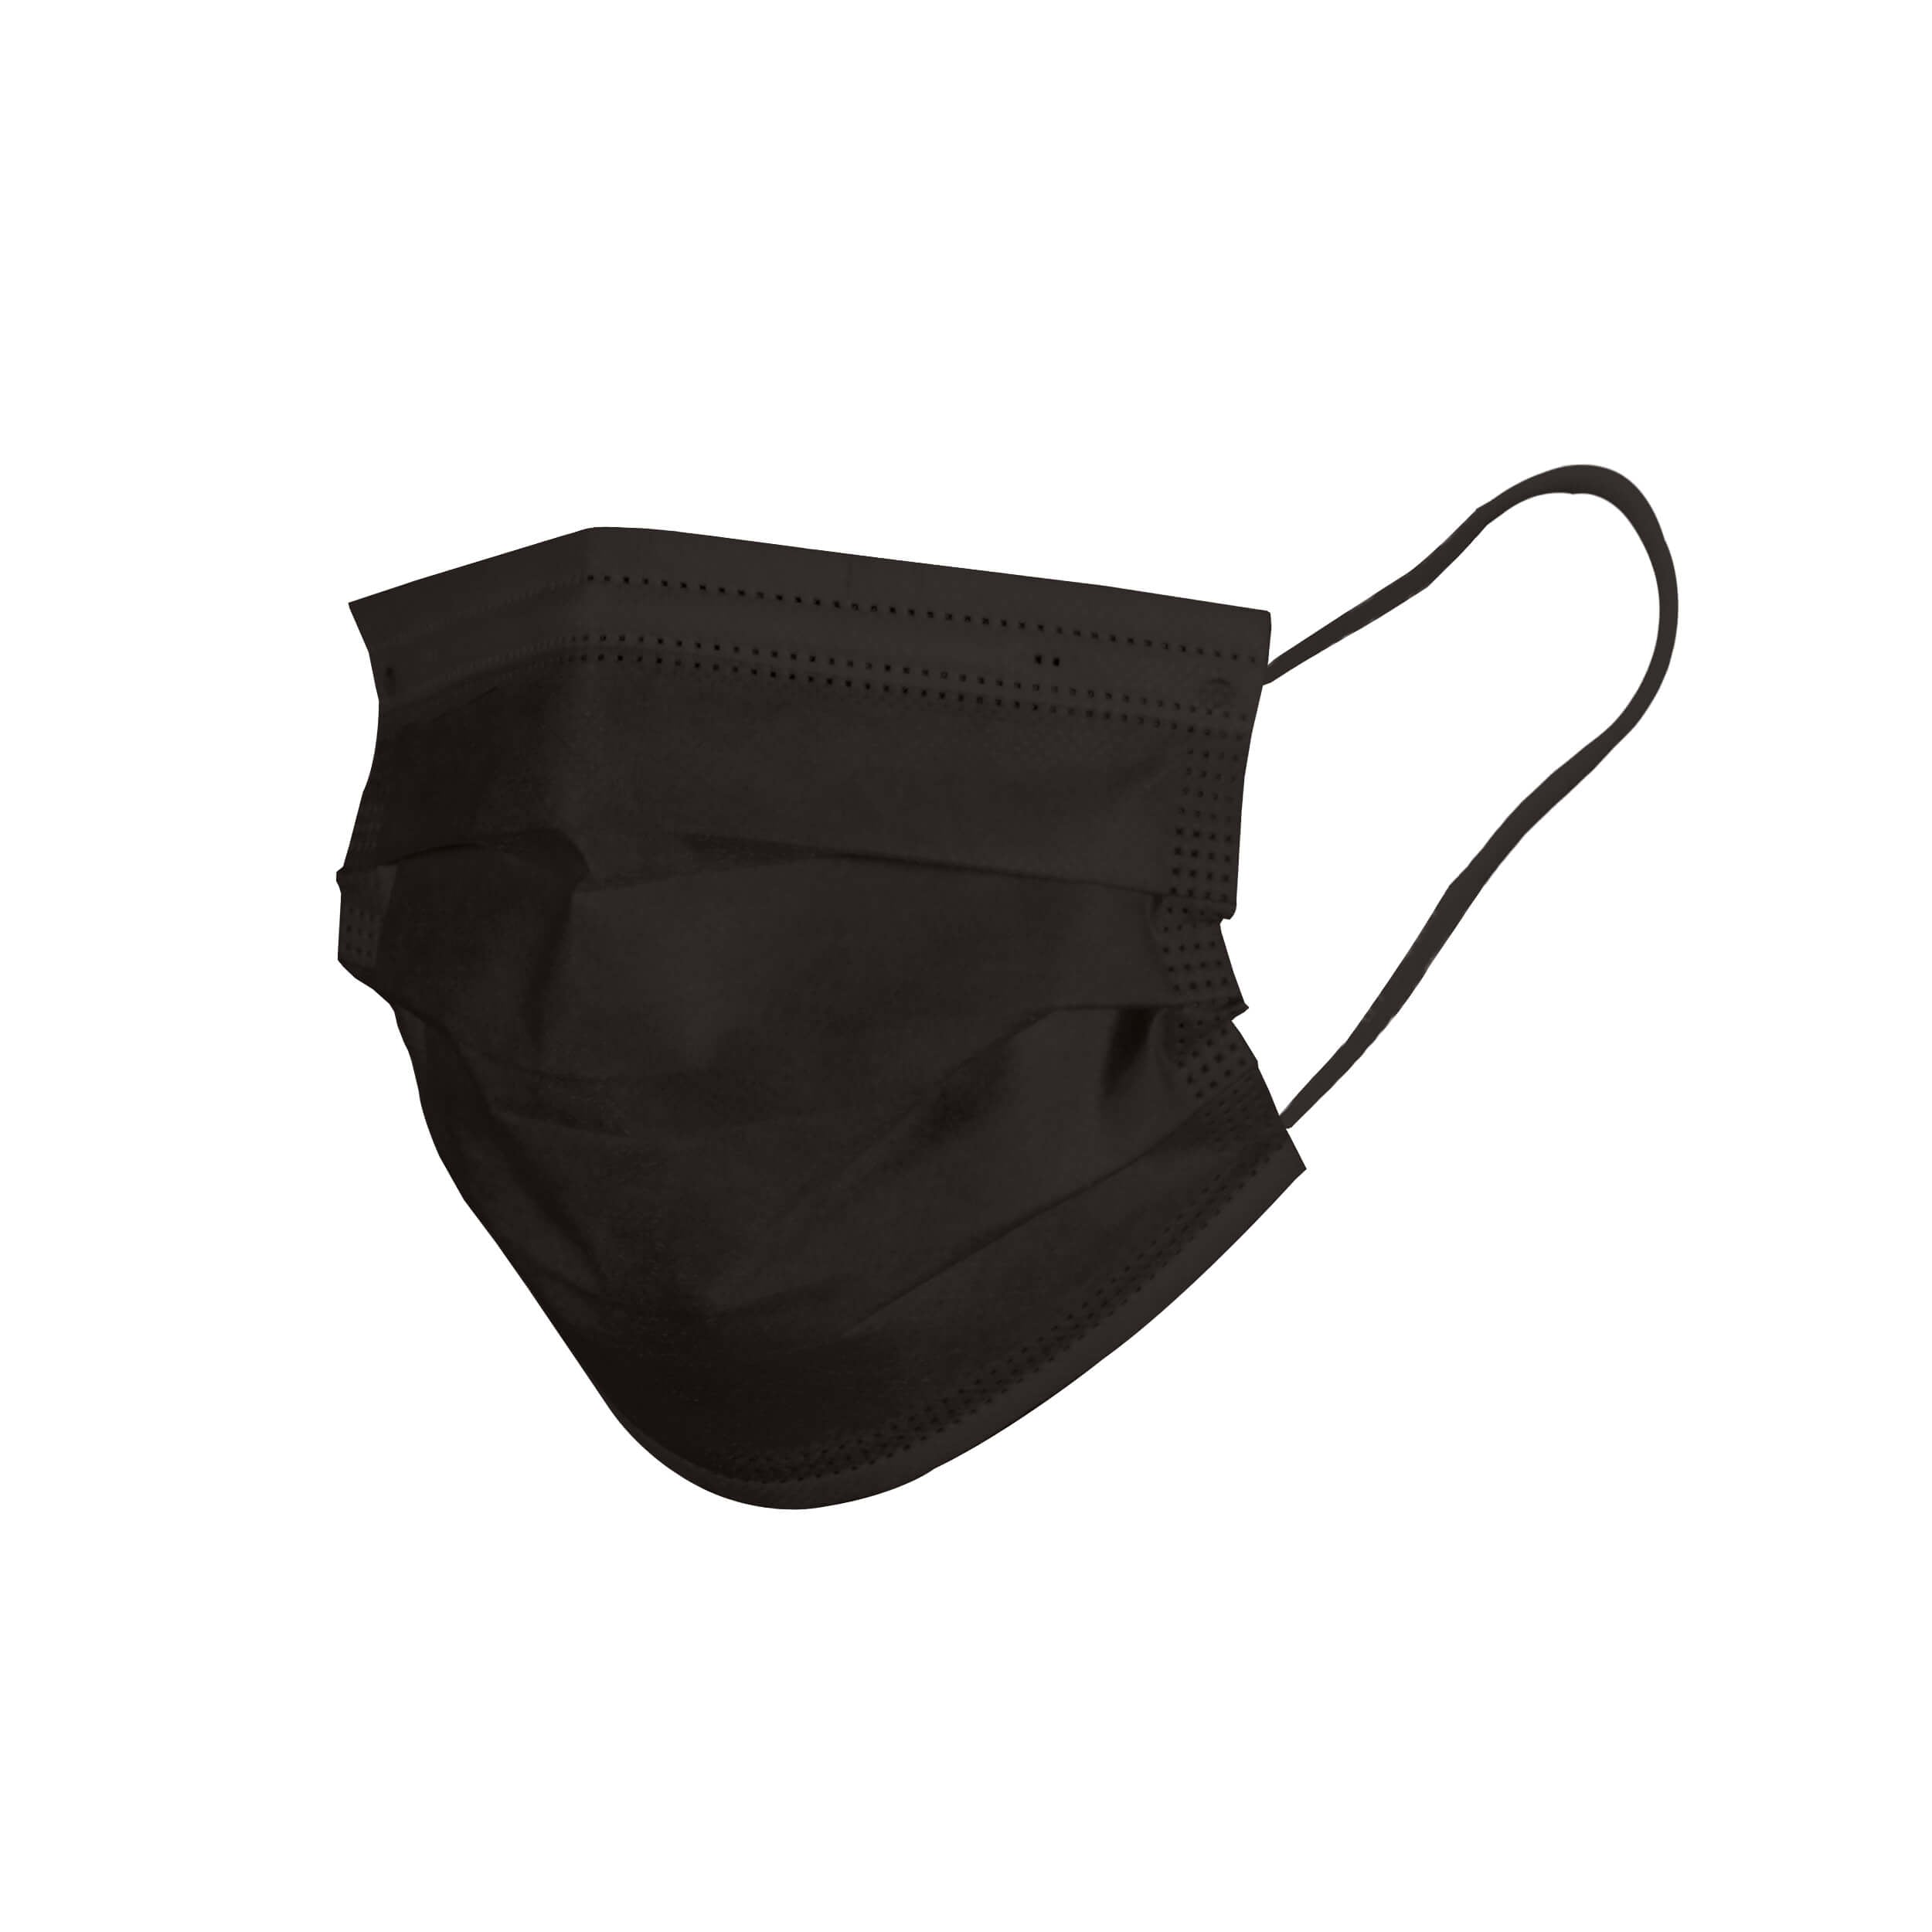 Näomask : Face mask antimicrobial Black